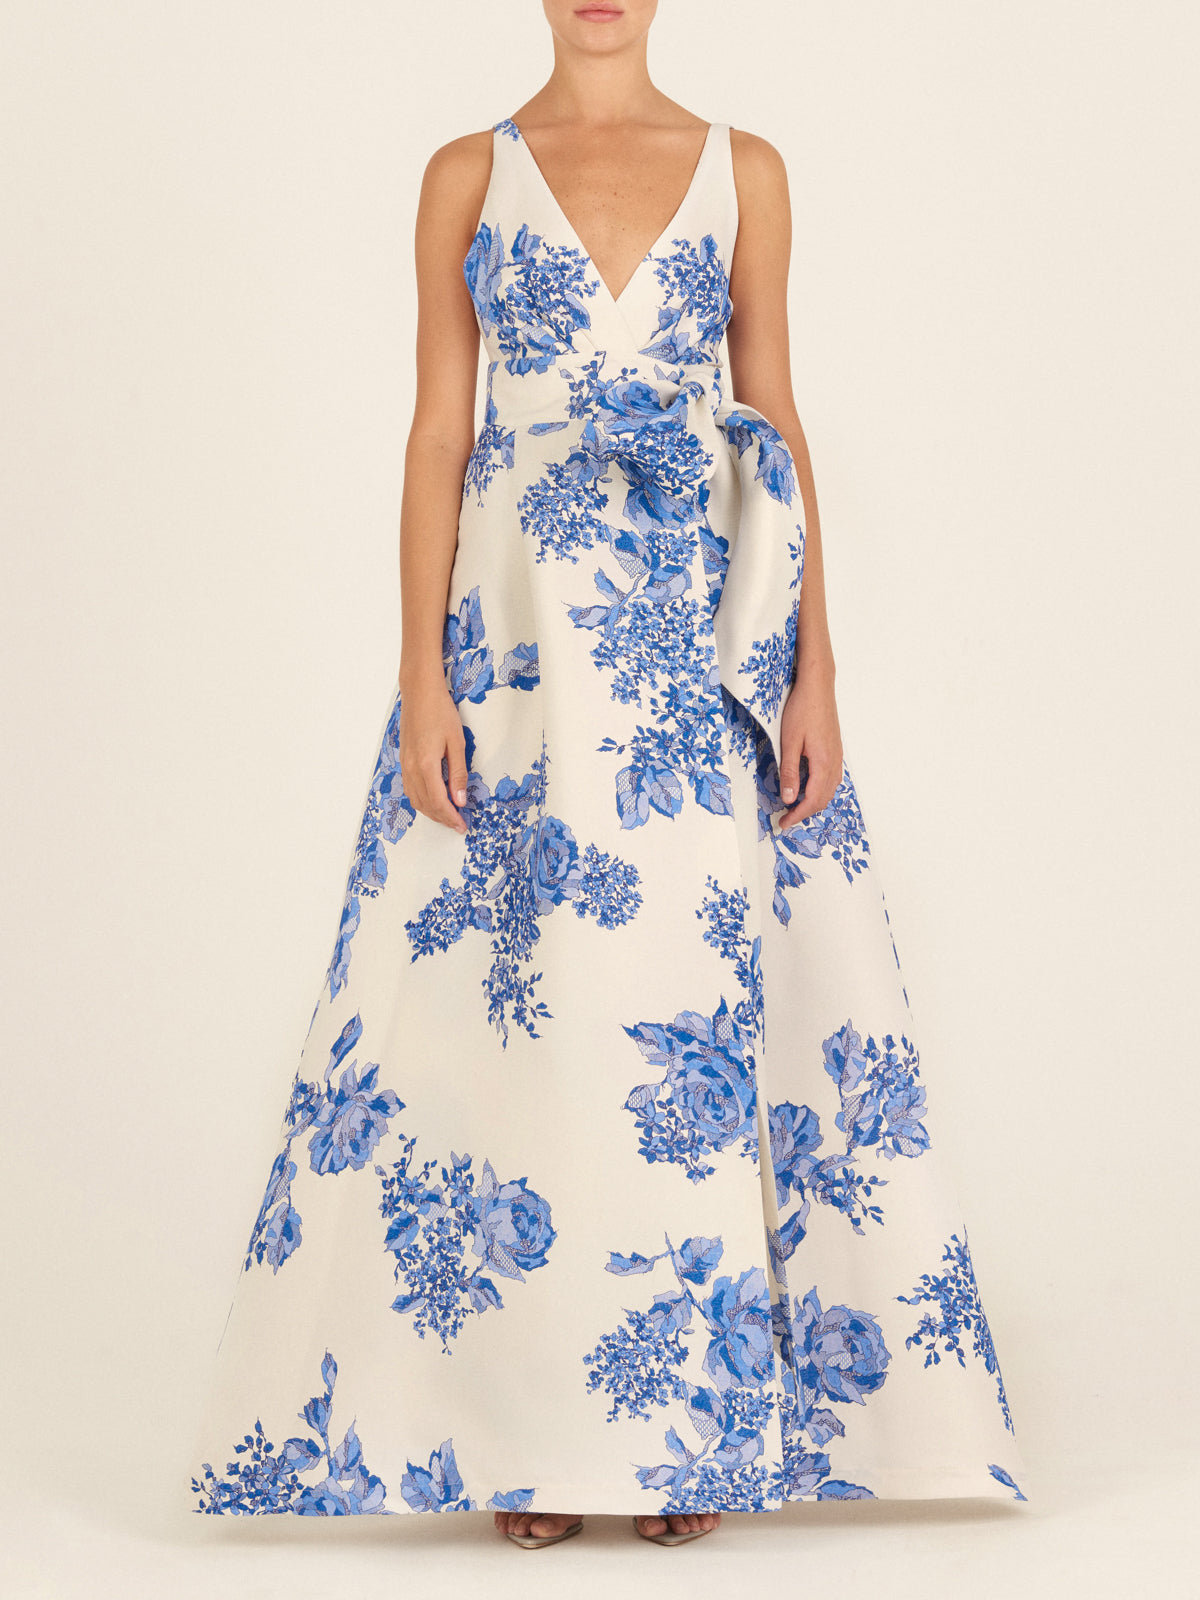 White sleeveless Logan Dress Blue Rose Motif with a bow on the shoulder, displayed against a white background.